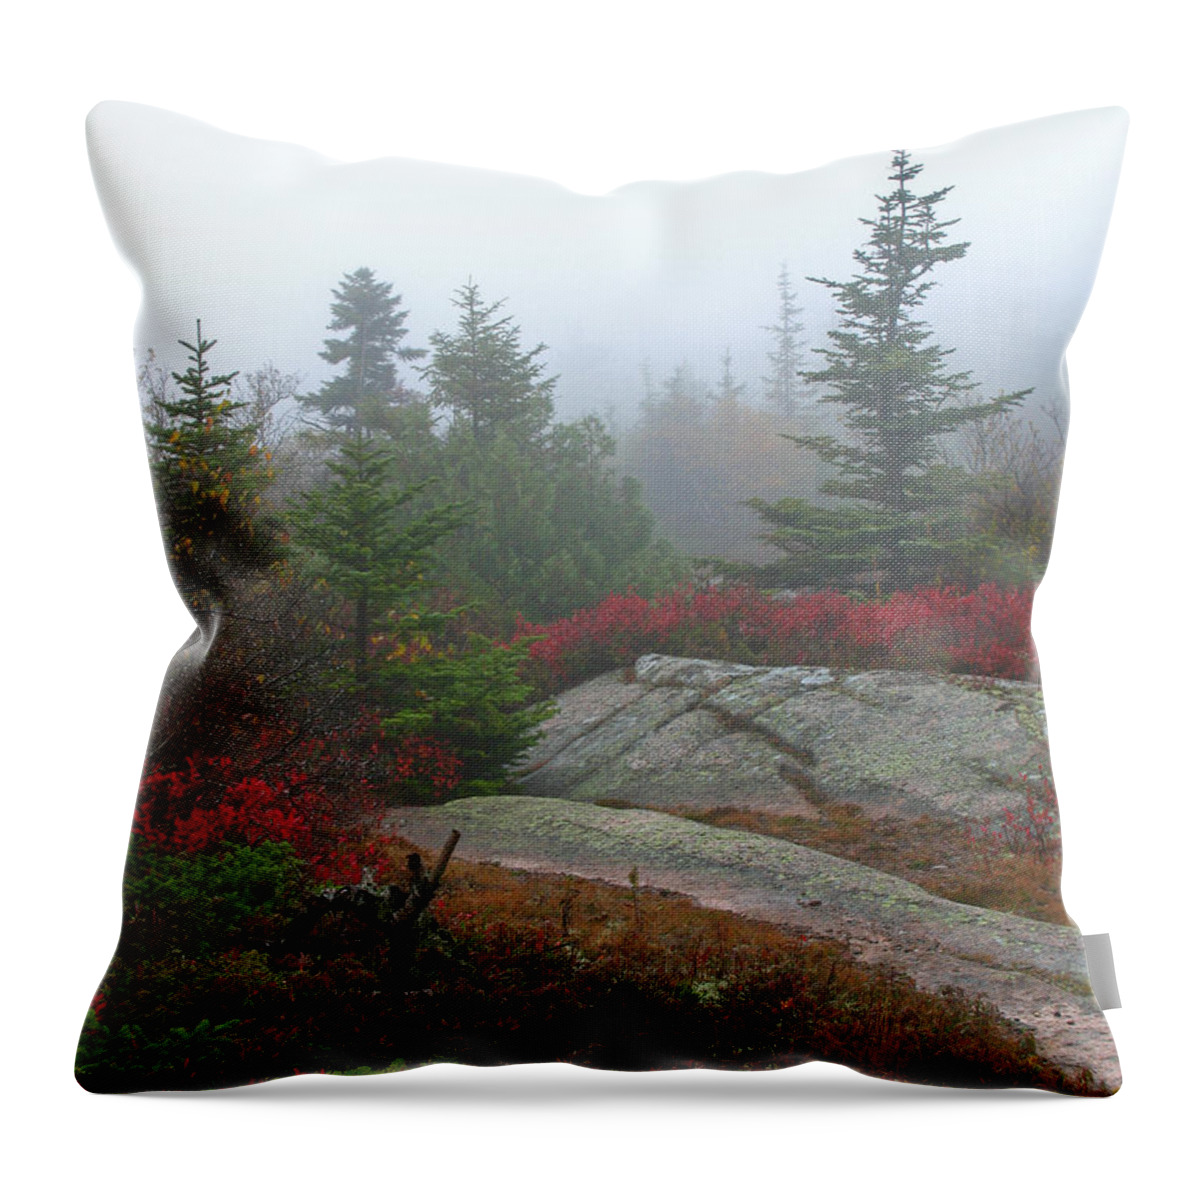 Acadia Np Throw Pillow featuring the photograph Cadillac Mountain #1 by Juergen Roth